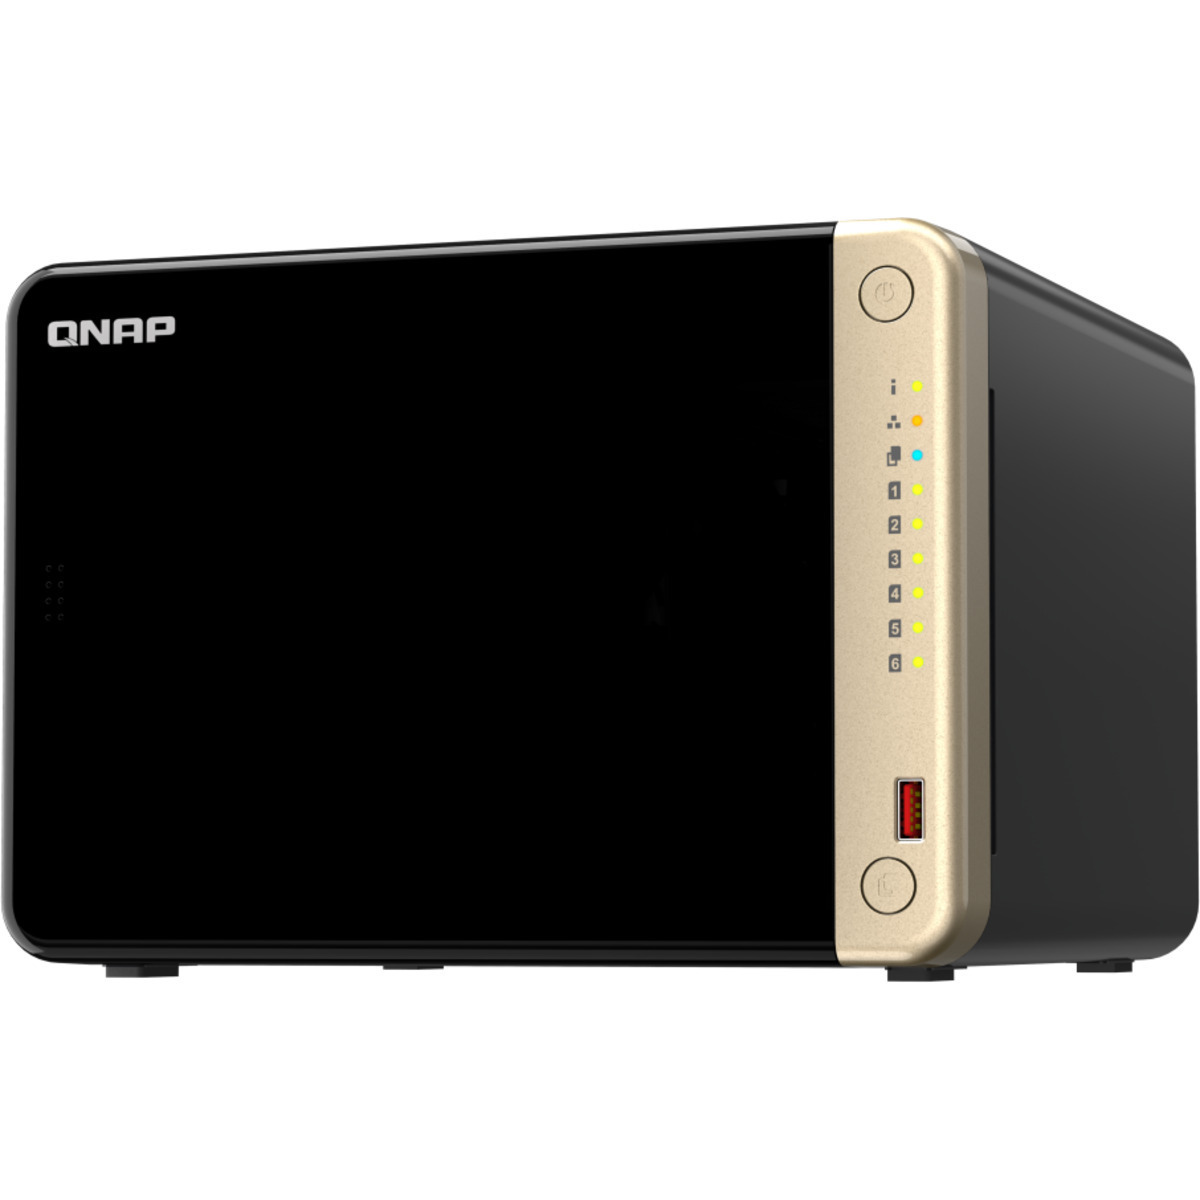 buy QNAP TS-664 60tb Desktop NAS - Network Attached Storage Device 6x10000gb Seagate IronWolf Pro ST10000NT001 3.5 7200rpm SATA 6Gb/s HDD NAS Class Drives Installed - Burn-In Tested - ON SALE - nas headquarters buy network attached storage server device das new raid-5 free shipping usa spring sale TS-664